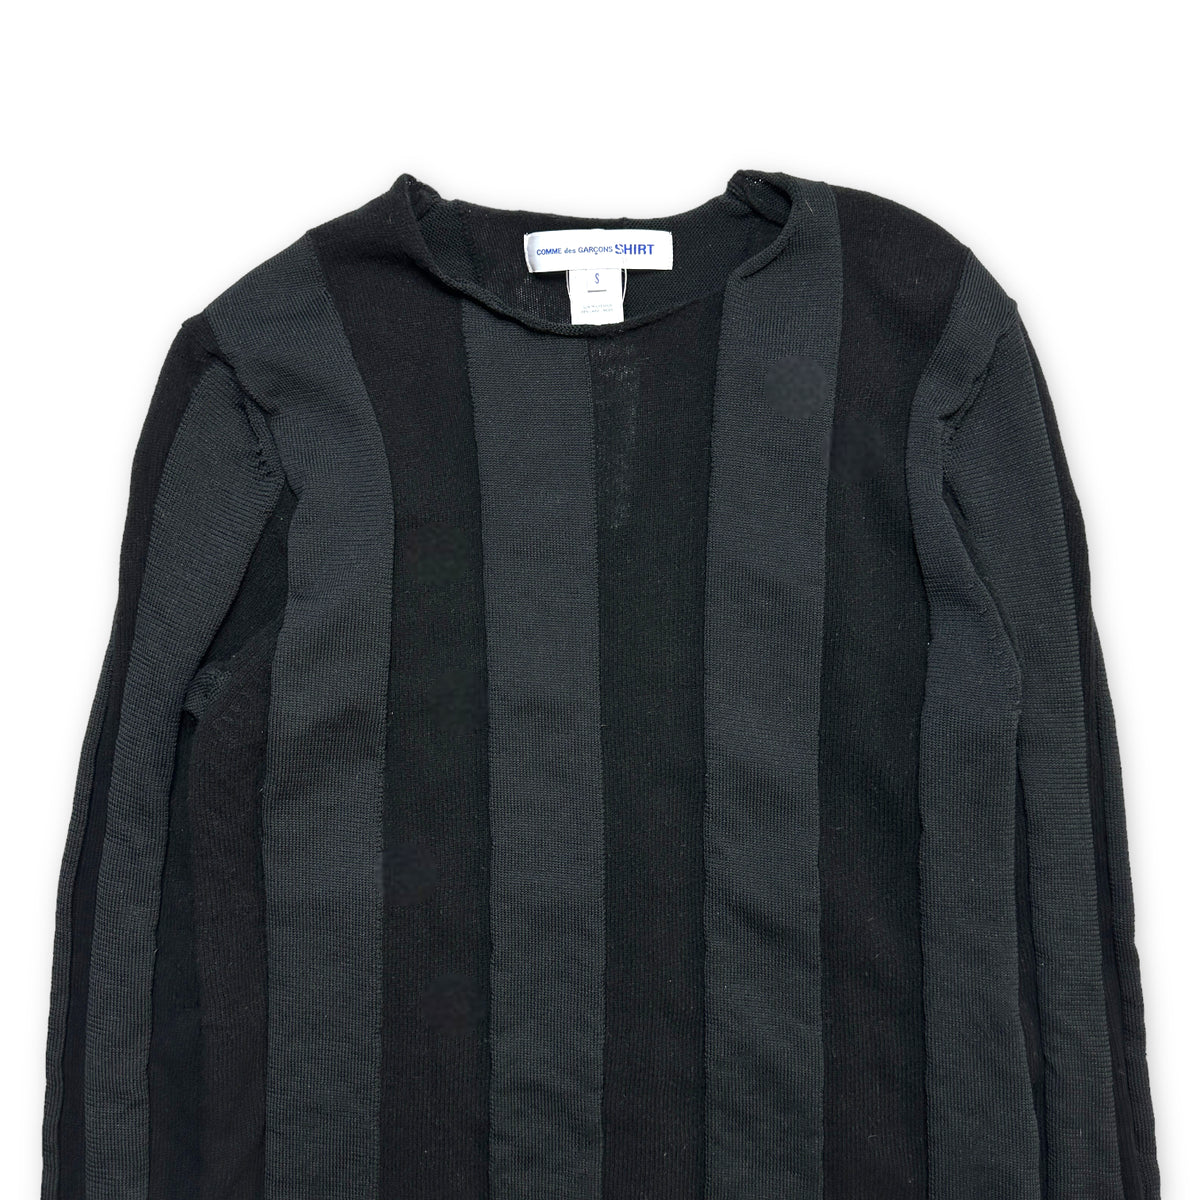 Comme Des Garcons SHIRT Feather Weight Striped Knit Sweater 